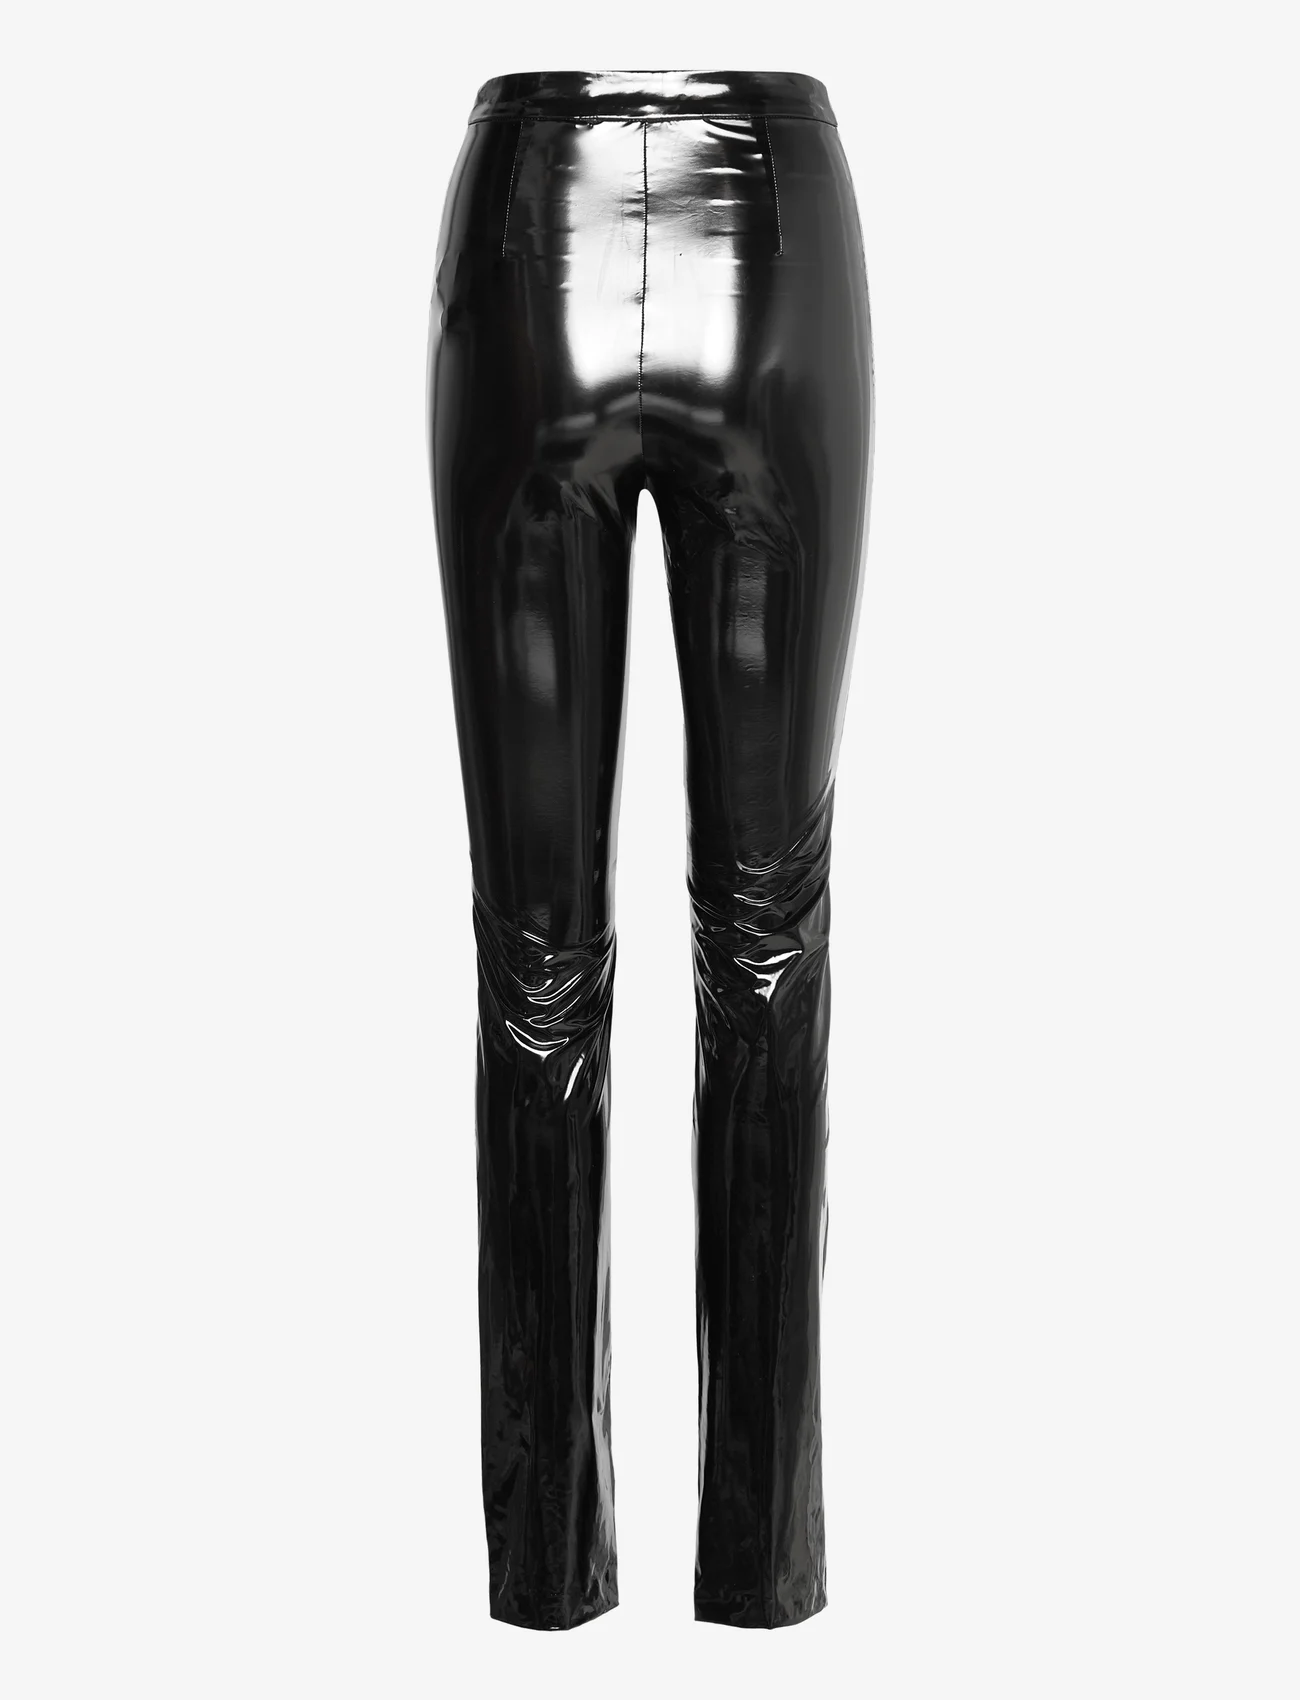 ROTATE Birger Christensen - Patent Coated Pants - party wear at outlet prices - black - 1